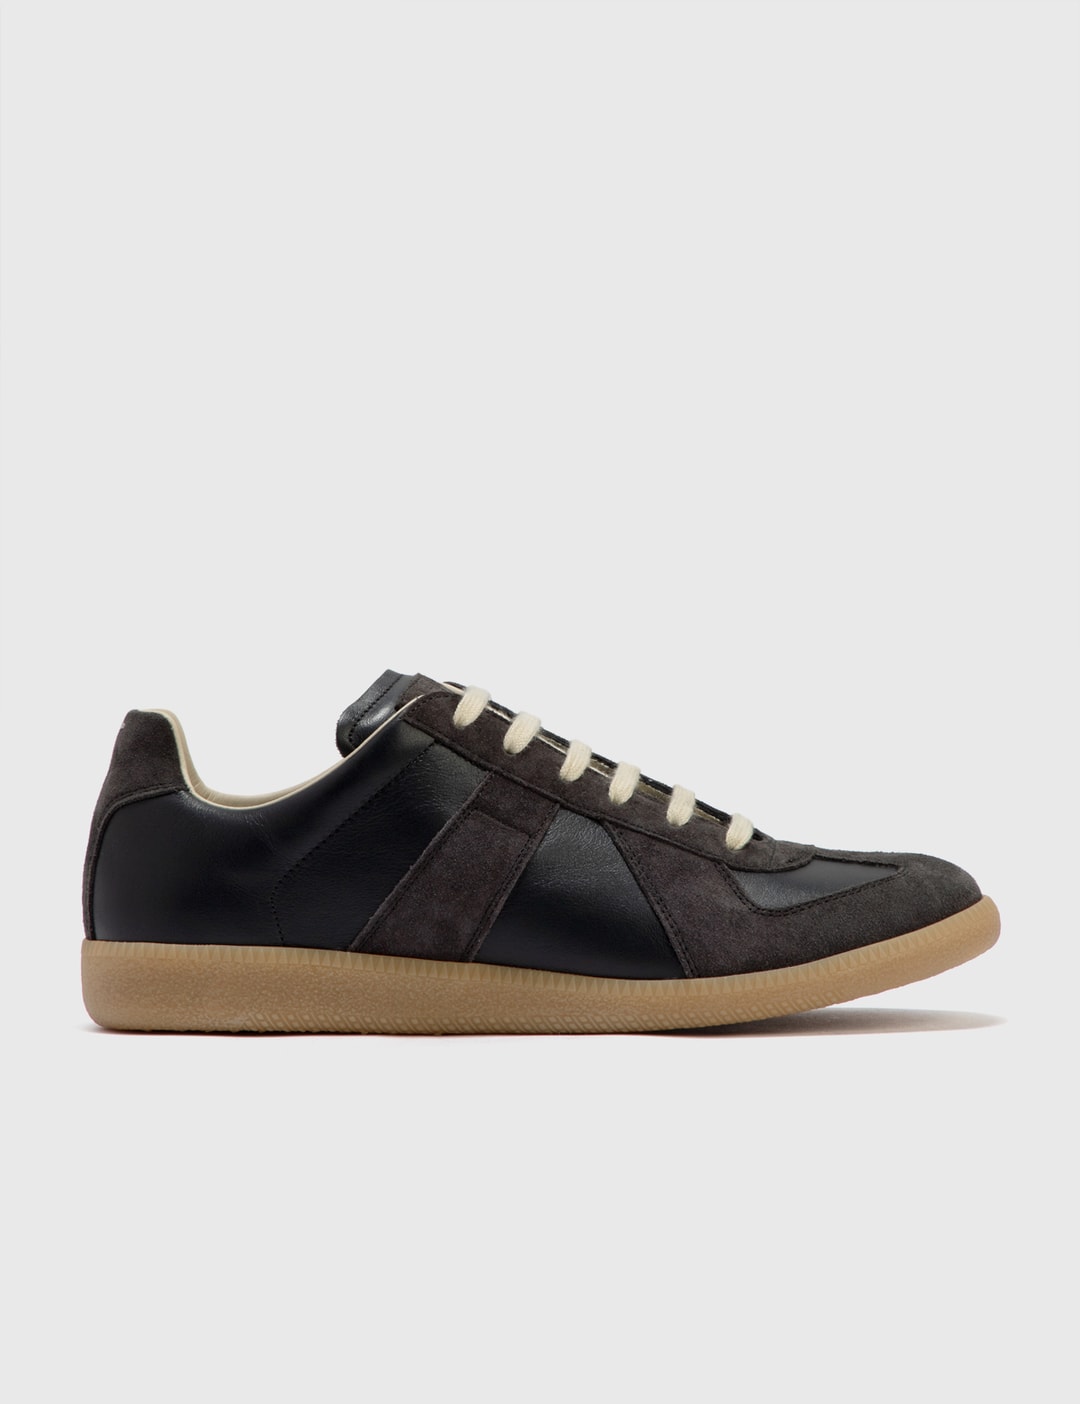 Maison Margiela - Replica Low Top Sneakers | HBX - Globally Curated ...